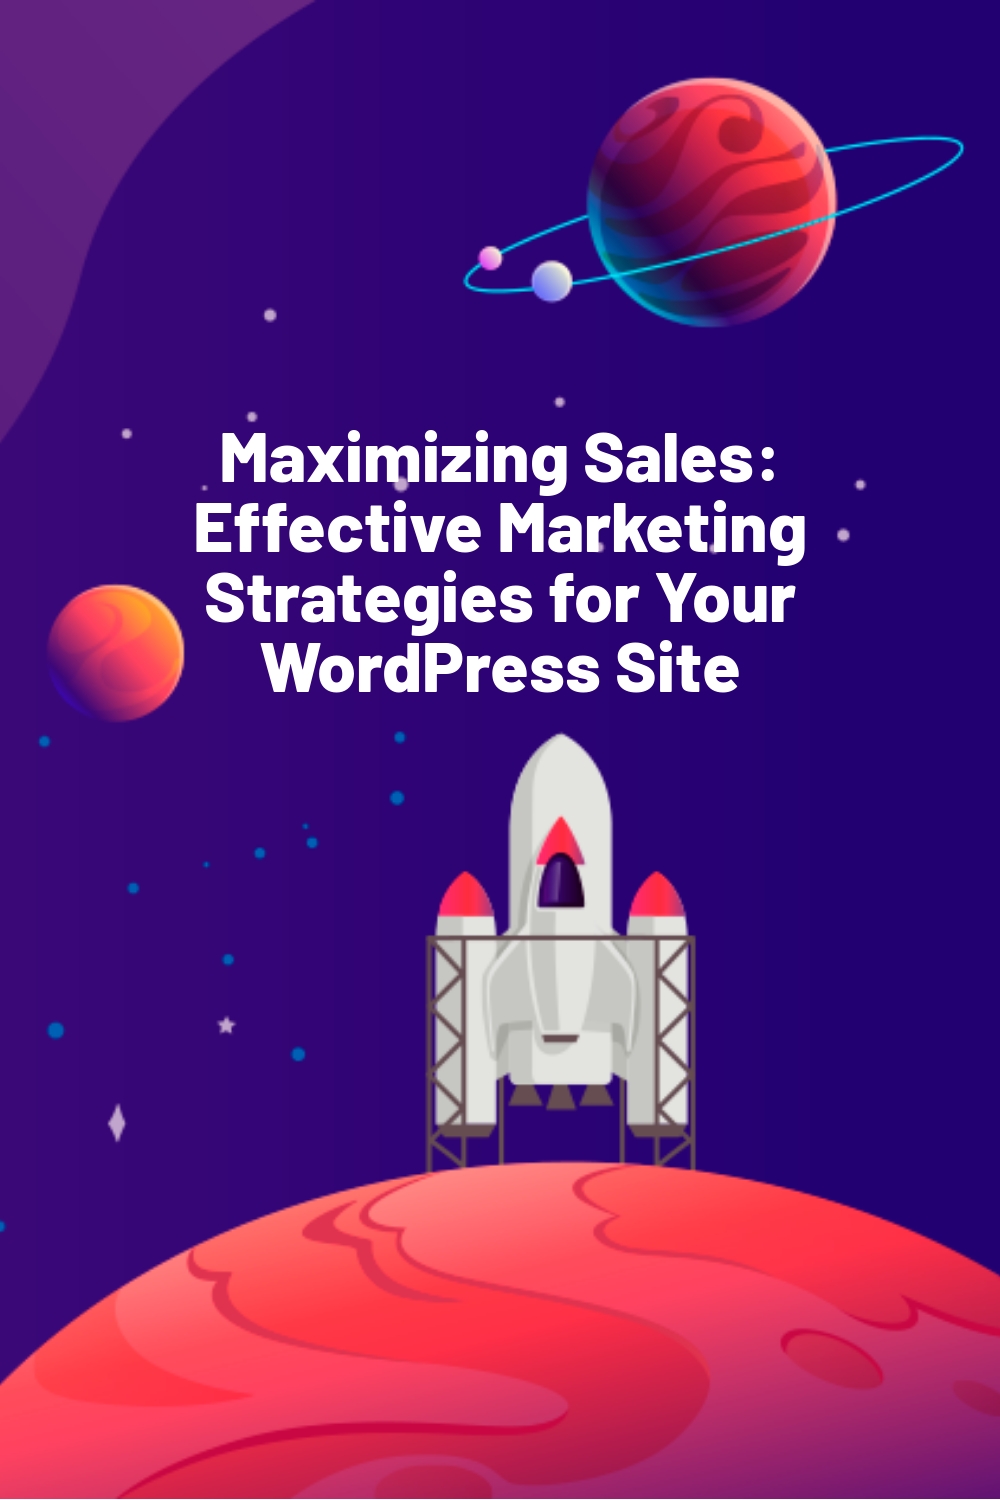 Maximizing Sales: Effective Marketing Strategies for Your WordPress Site